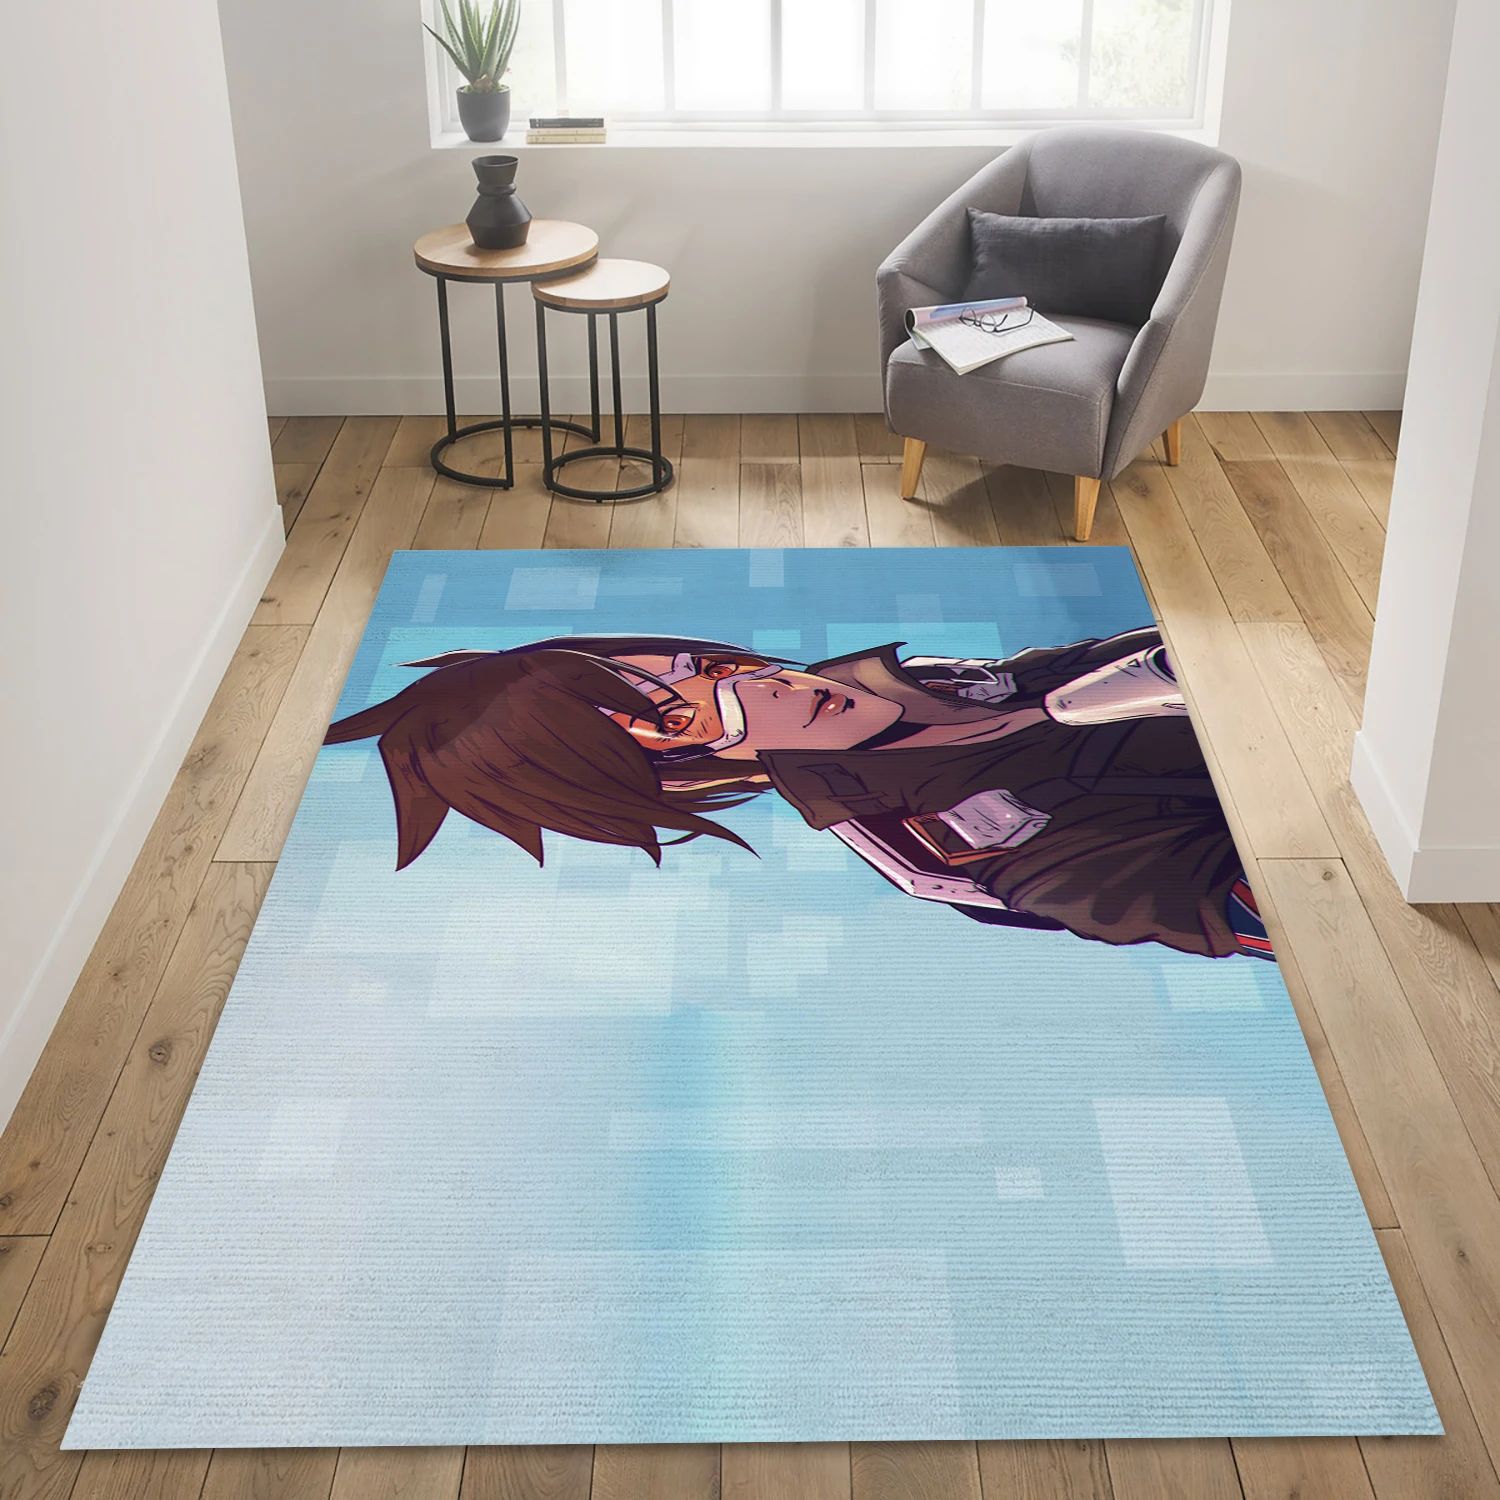 Tracer Overwatch Video Game Reangle Rug, Living Room Rug - Home Decor Floor Decor - Indoor Outdoor Rugs